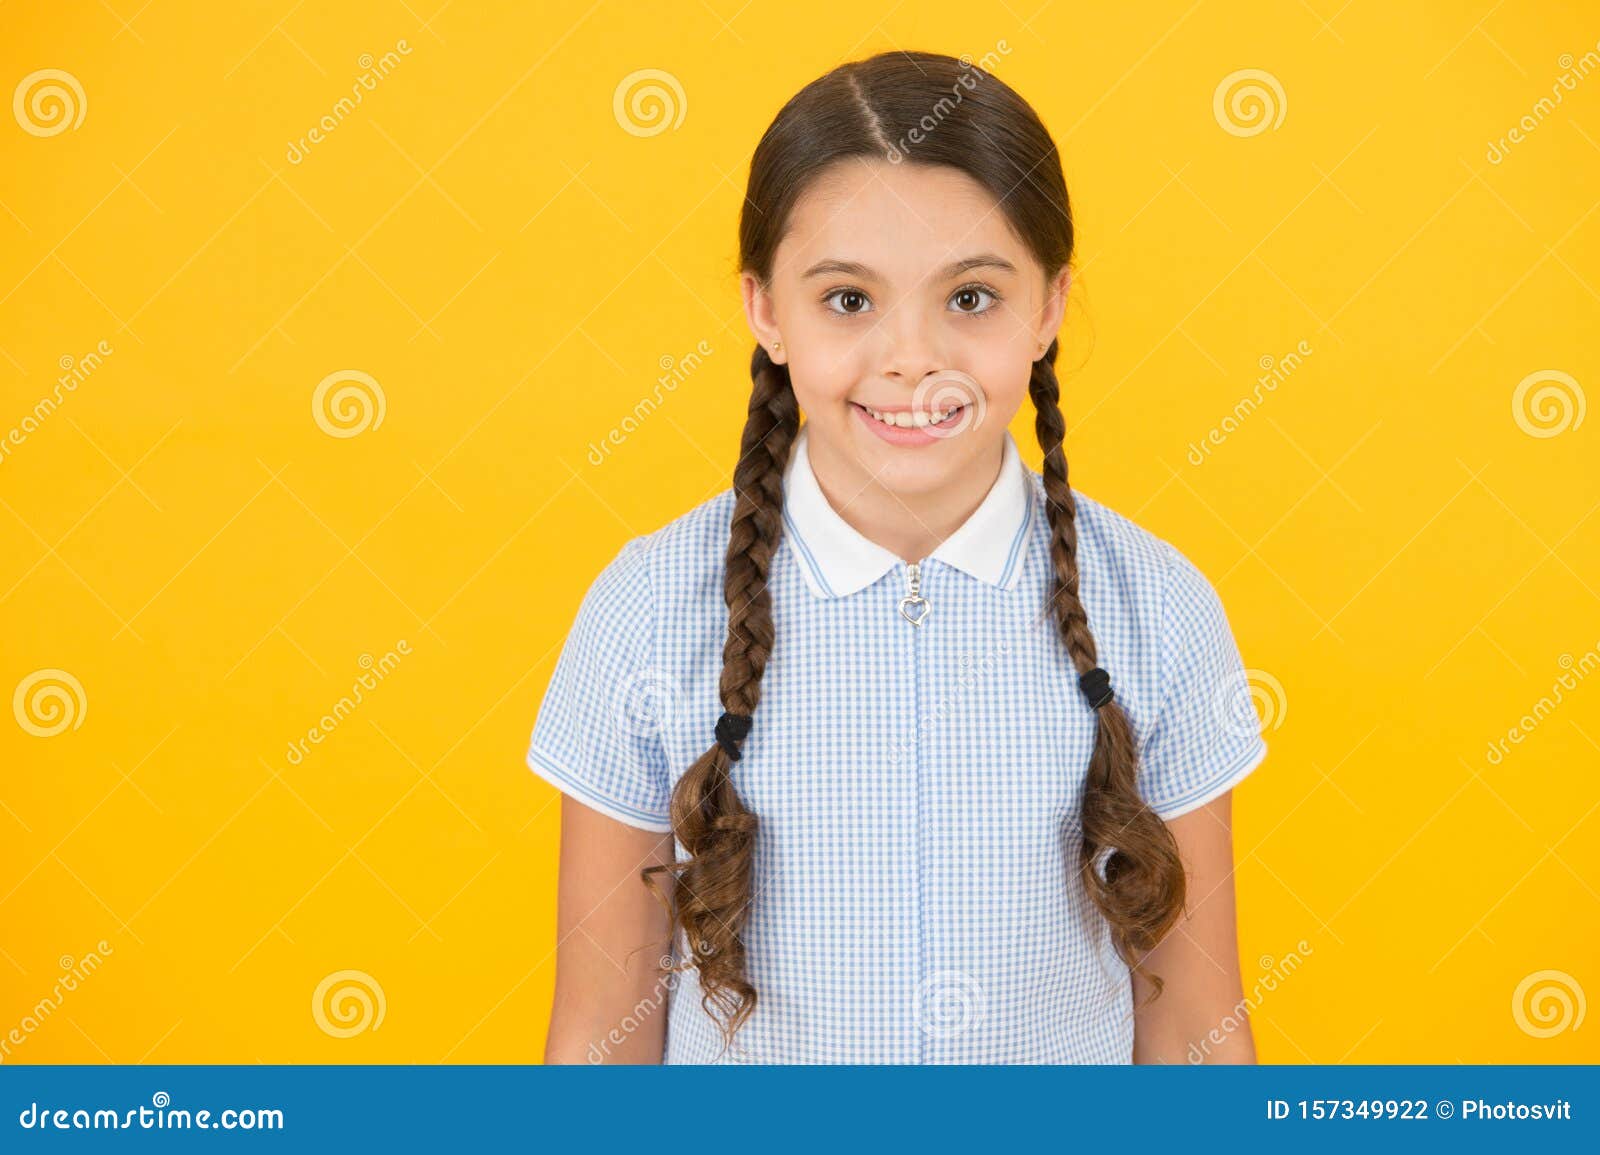 Tidy Hairstyle. Little Girl with Cute Braids. Beautiful Braids. Braided  Hairstyle Concept Stock Photo - Image of modern, child: 157349922